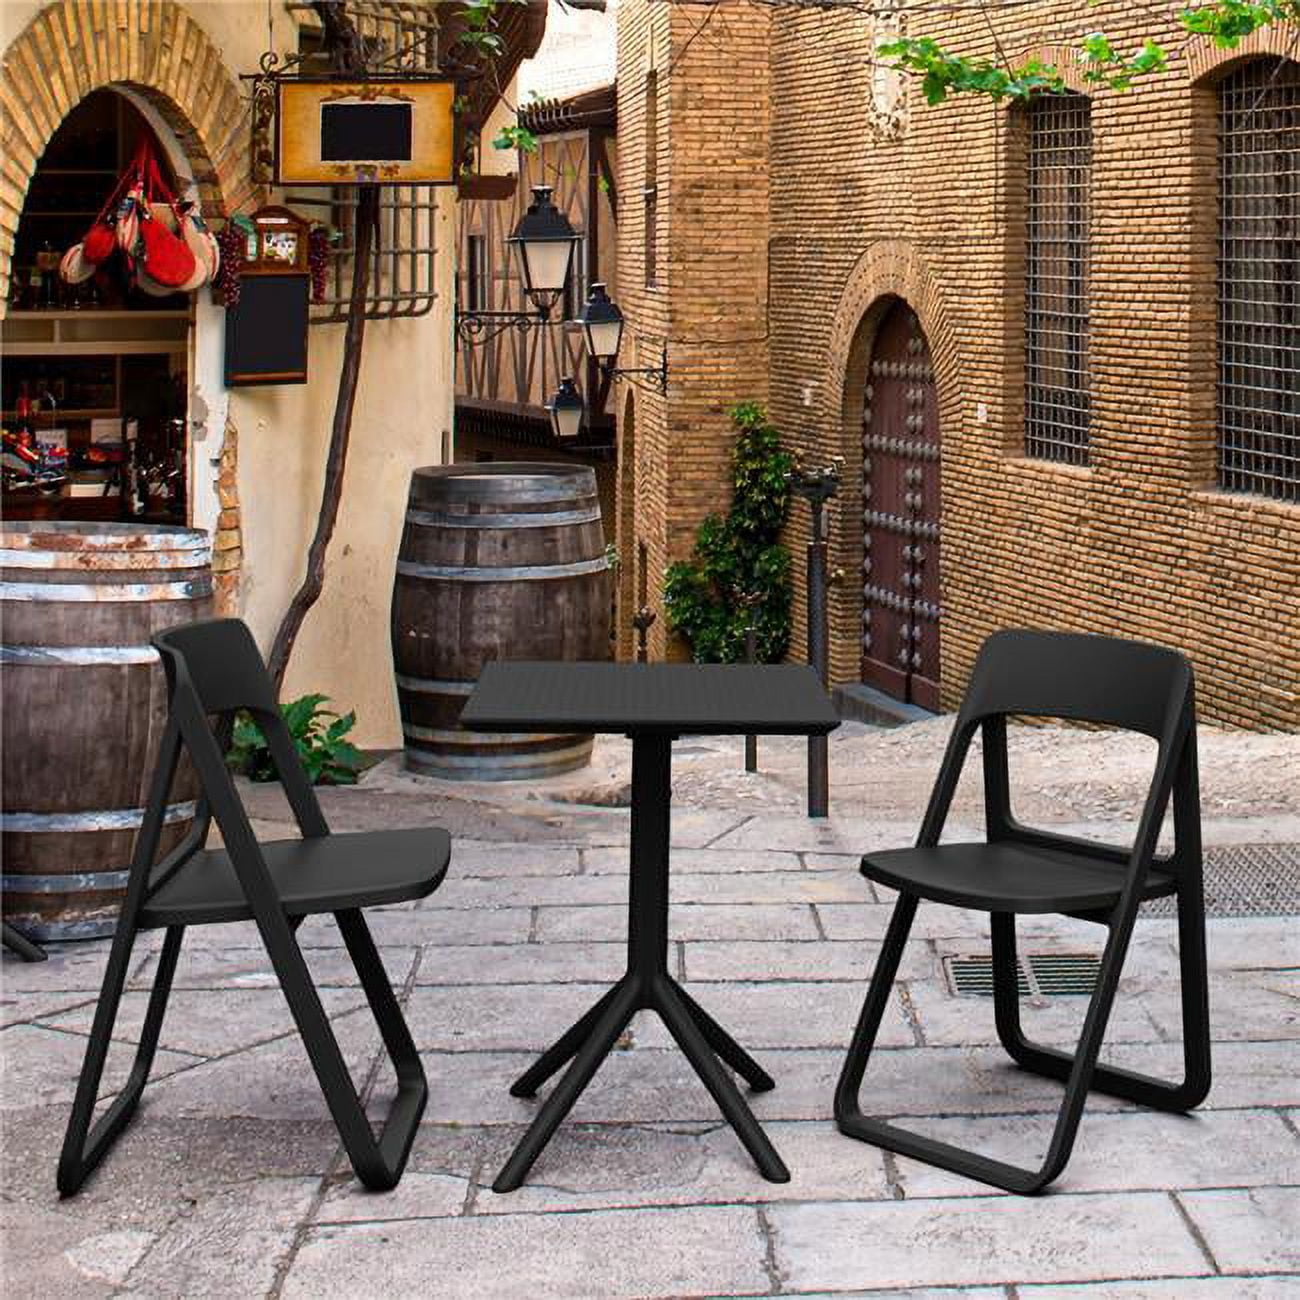 Isp0791s-bla-bla Dream Folding Outdoor Bistro Set With 2 Chairs, Black